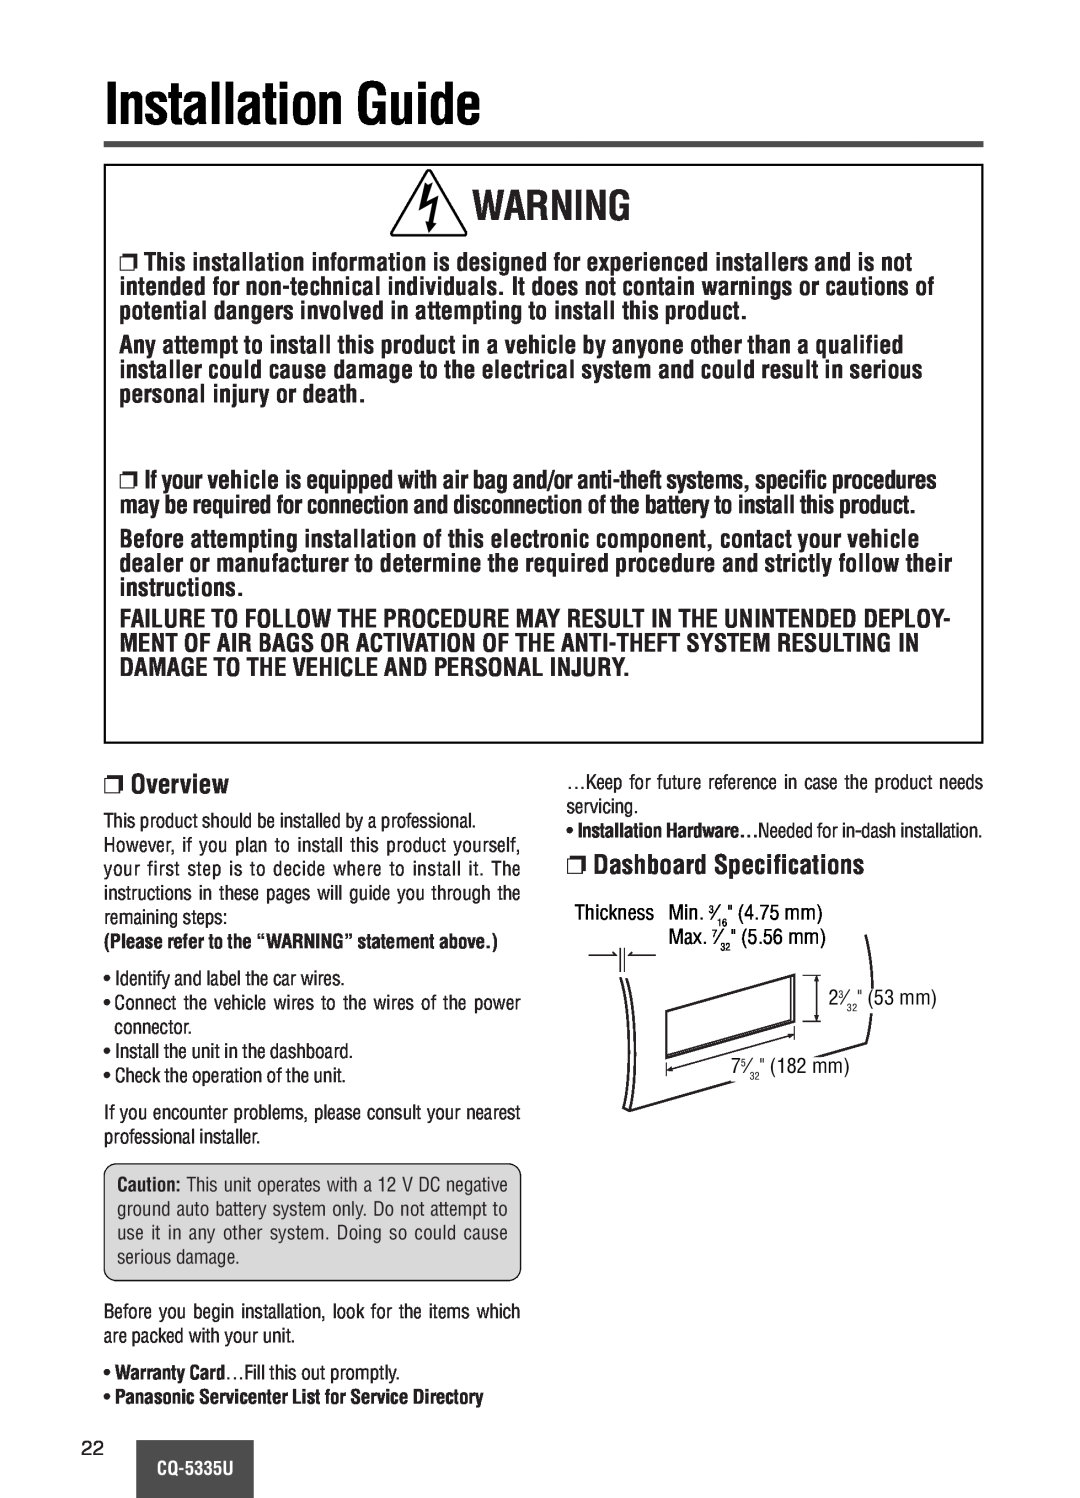 Panasonic CQ-5335U operating instructions Installation Guide, Overview, Dashboard Specifications 